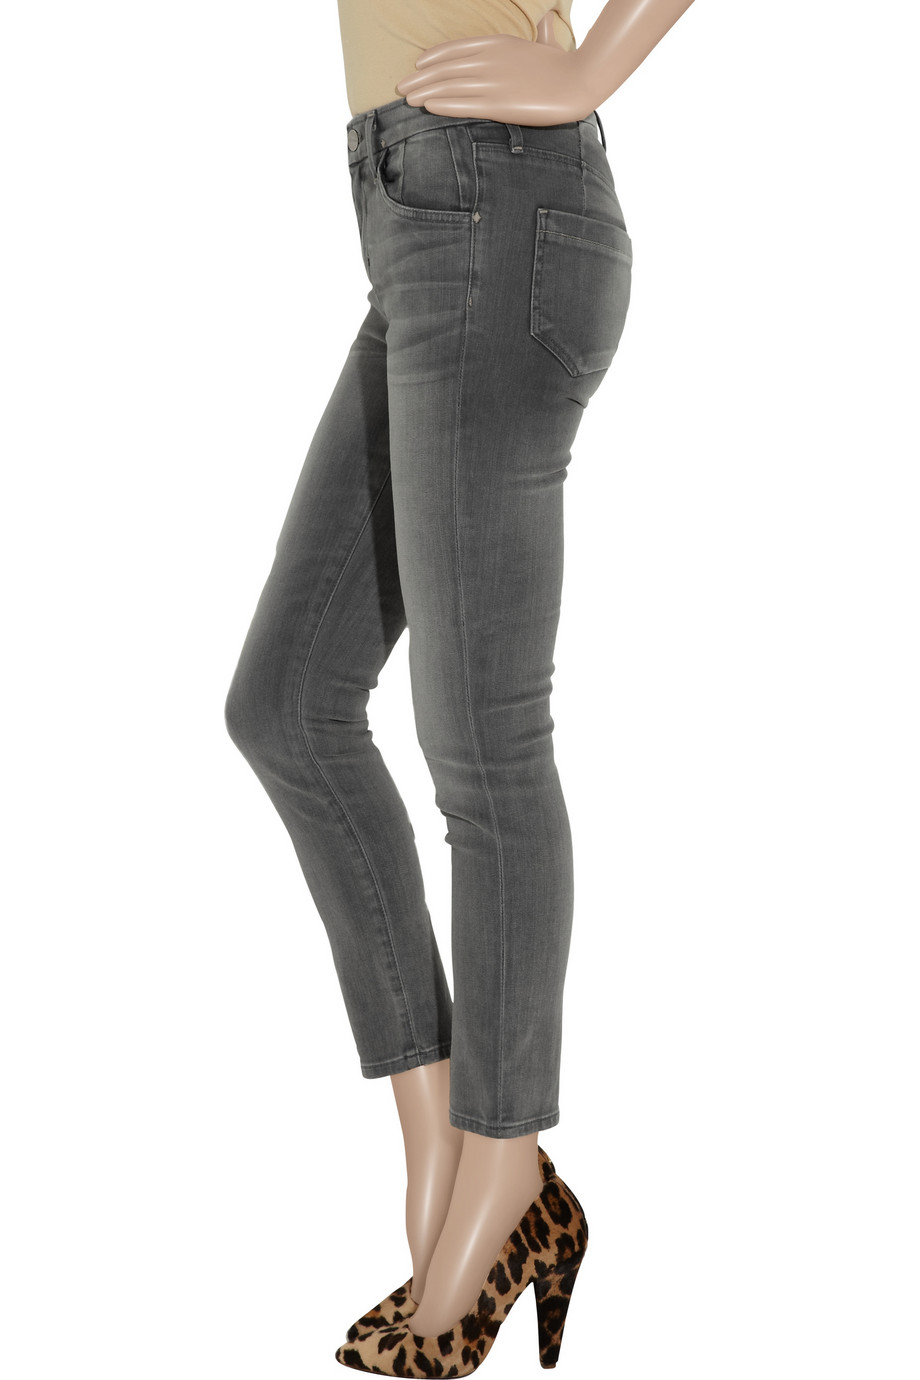 Goldsign Virtual High-rise Cropped Skinny Jeans in Anthracite (Gray) - Lyst